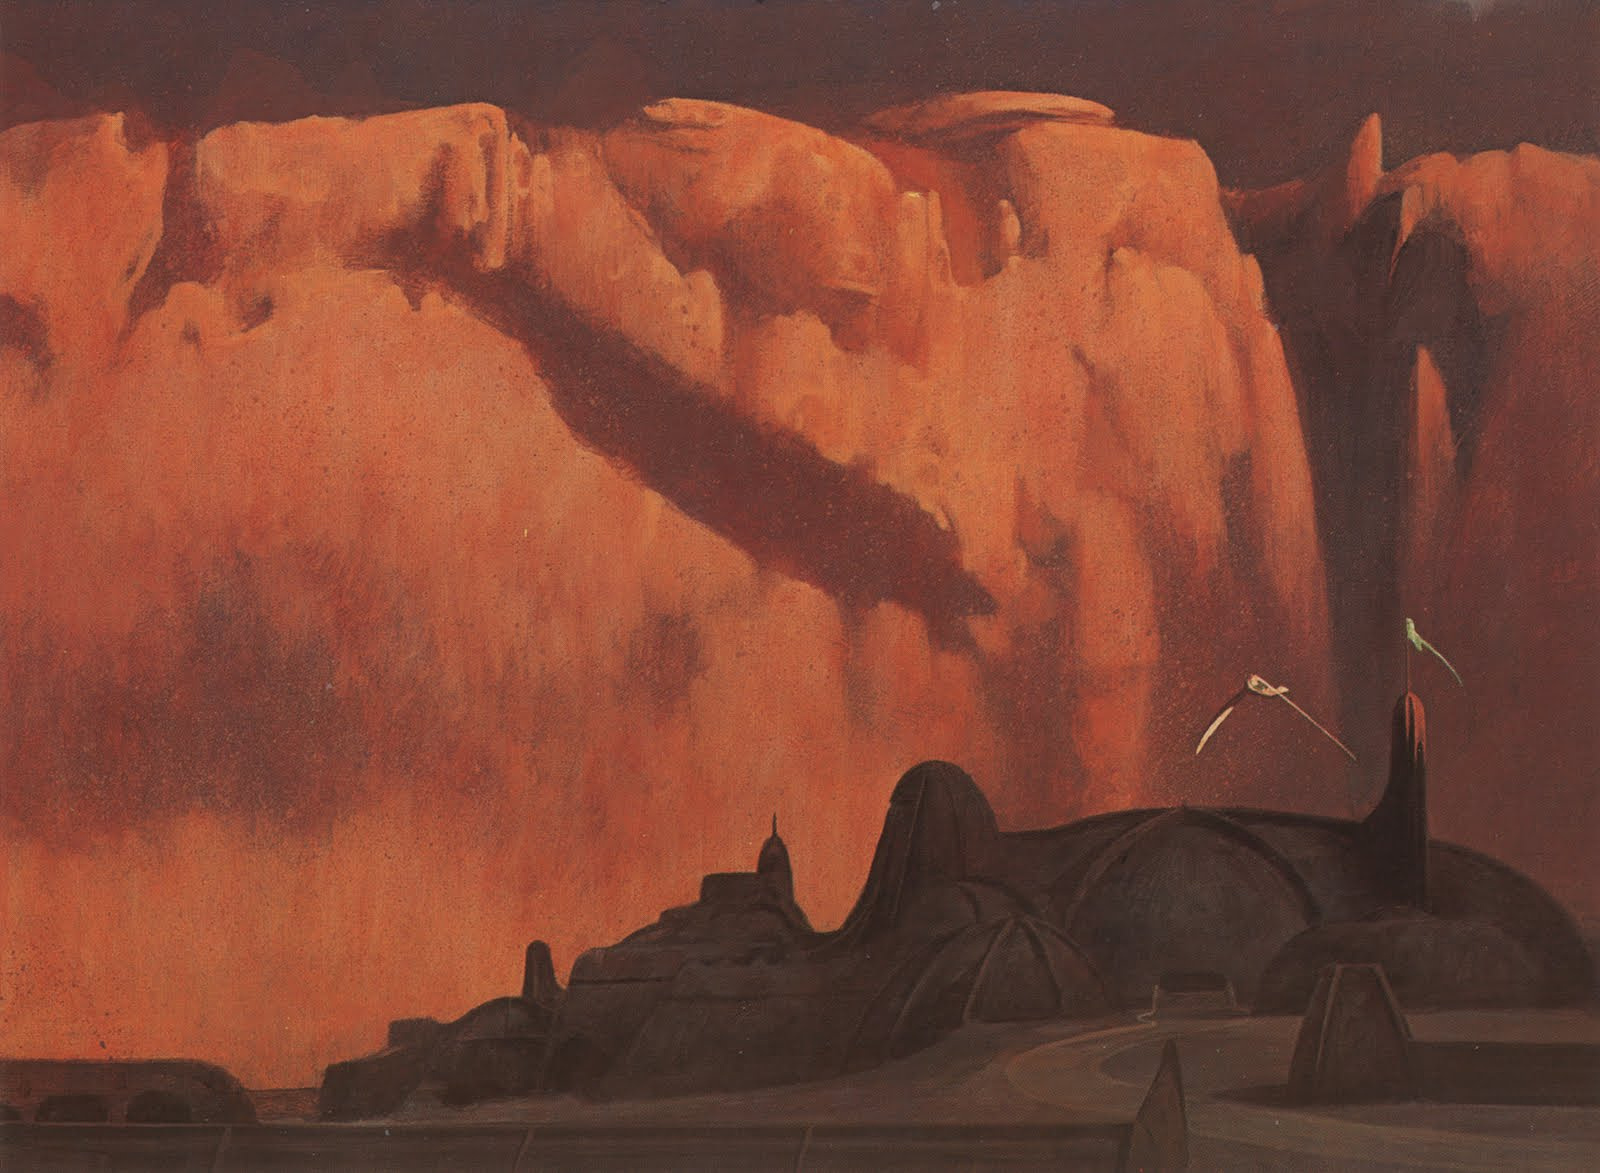 "Dawn at the Palace of Arrakkeen" from The Illustrated Dune